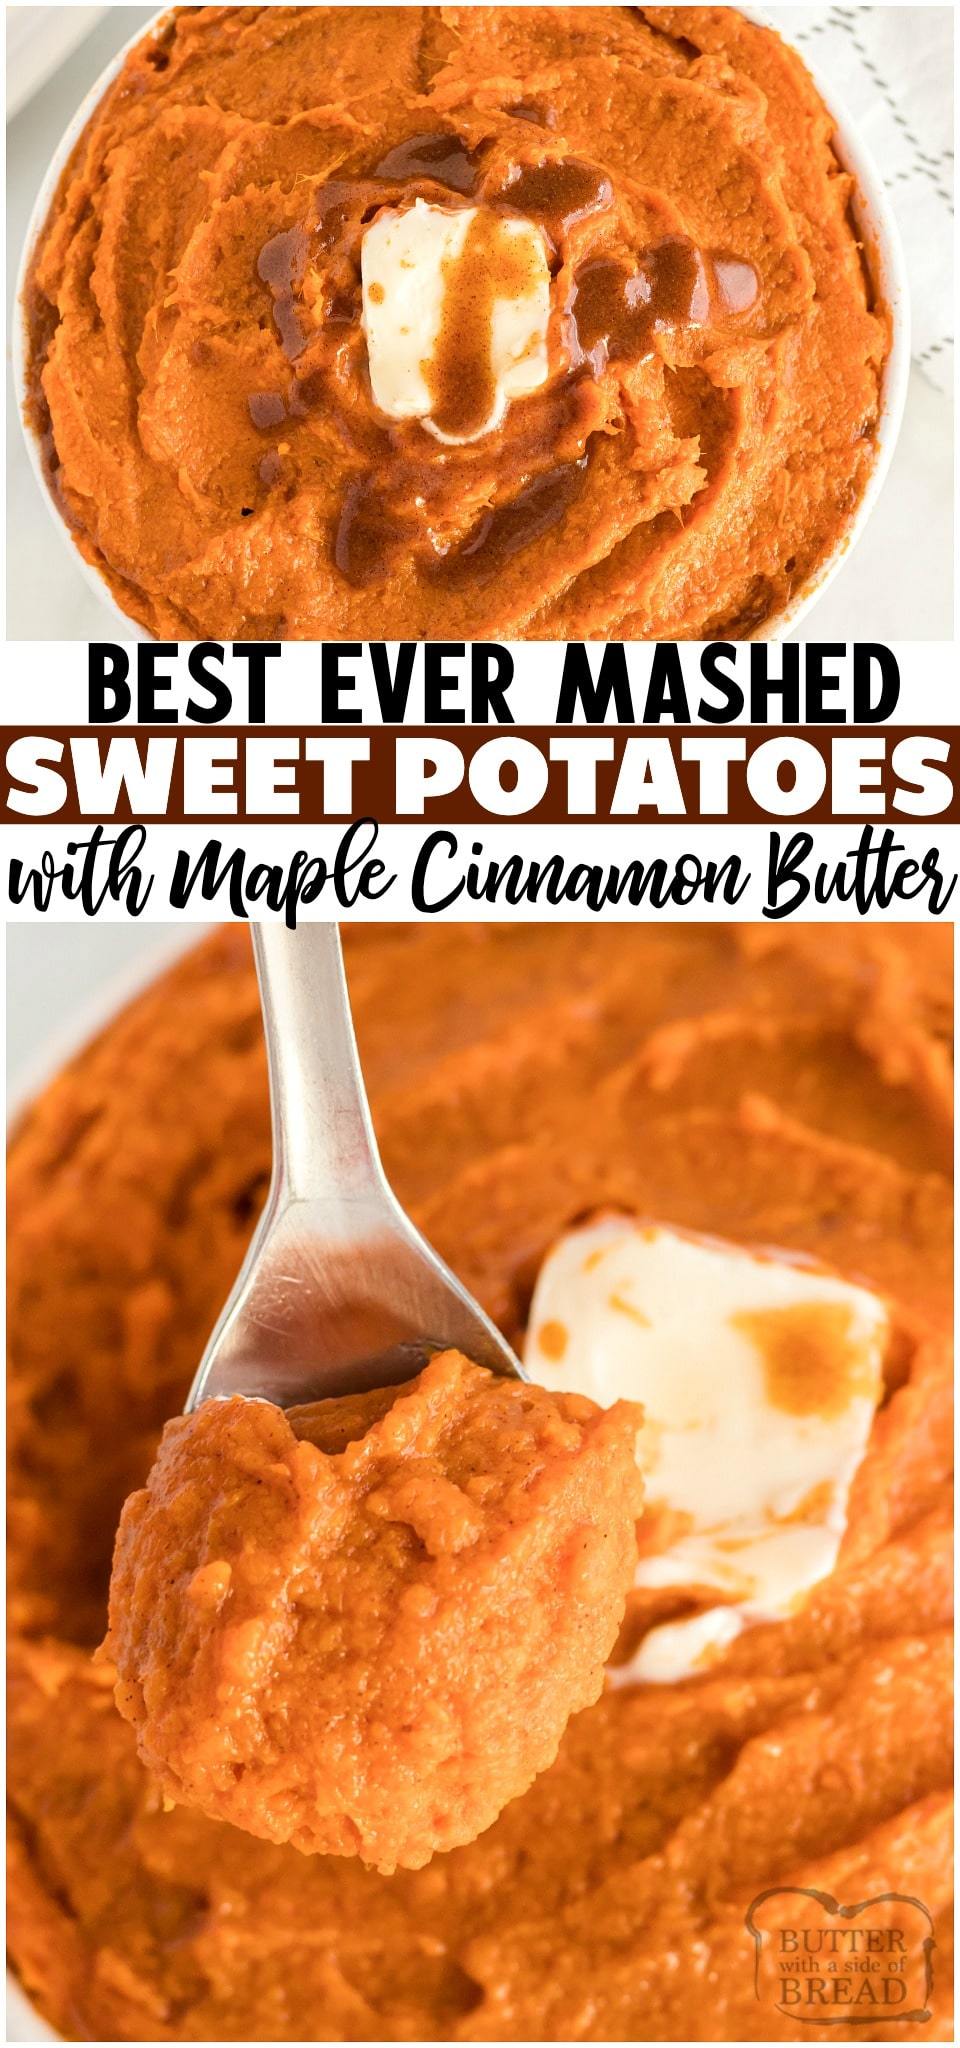 Mashed Sweet Potatoes topped with Cinnamon Maple Butter Sauce for tender, flavorful sweet potatoes perfect for the holidays! #sweetpotato #mashedpotatoes #sidedish #holidays #cinnamon #butter #recipe from BUTTER WITH A SIDE OF BREAD